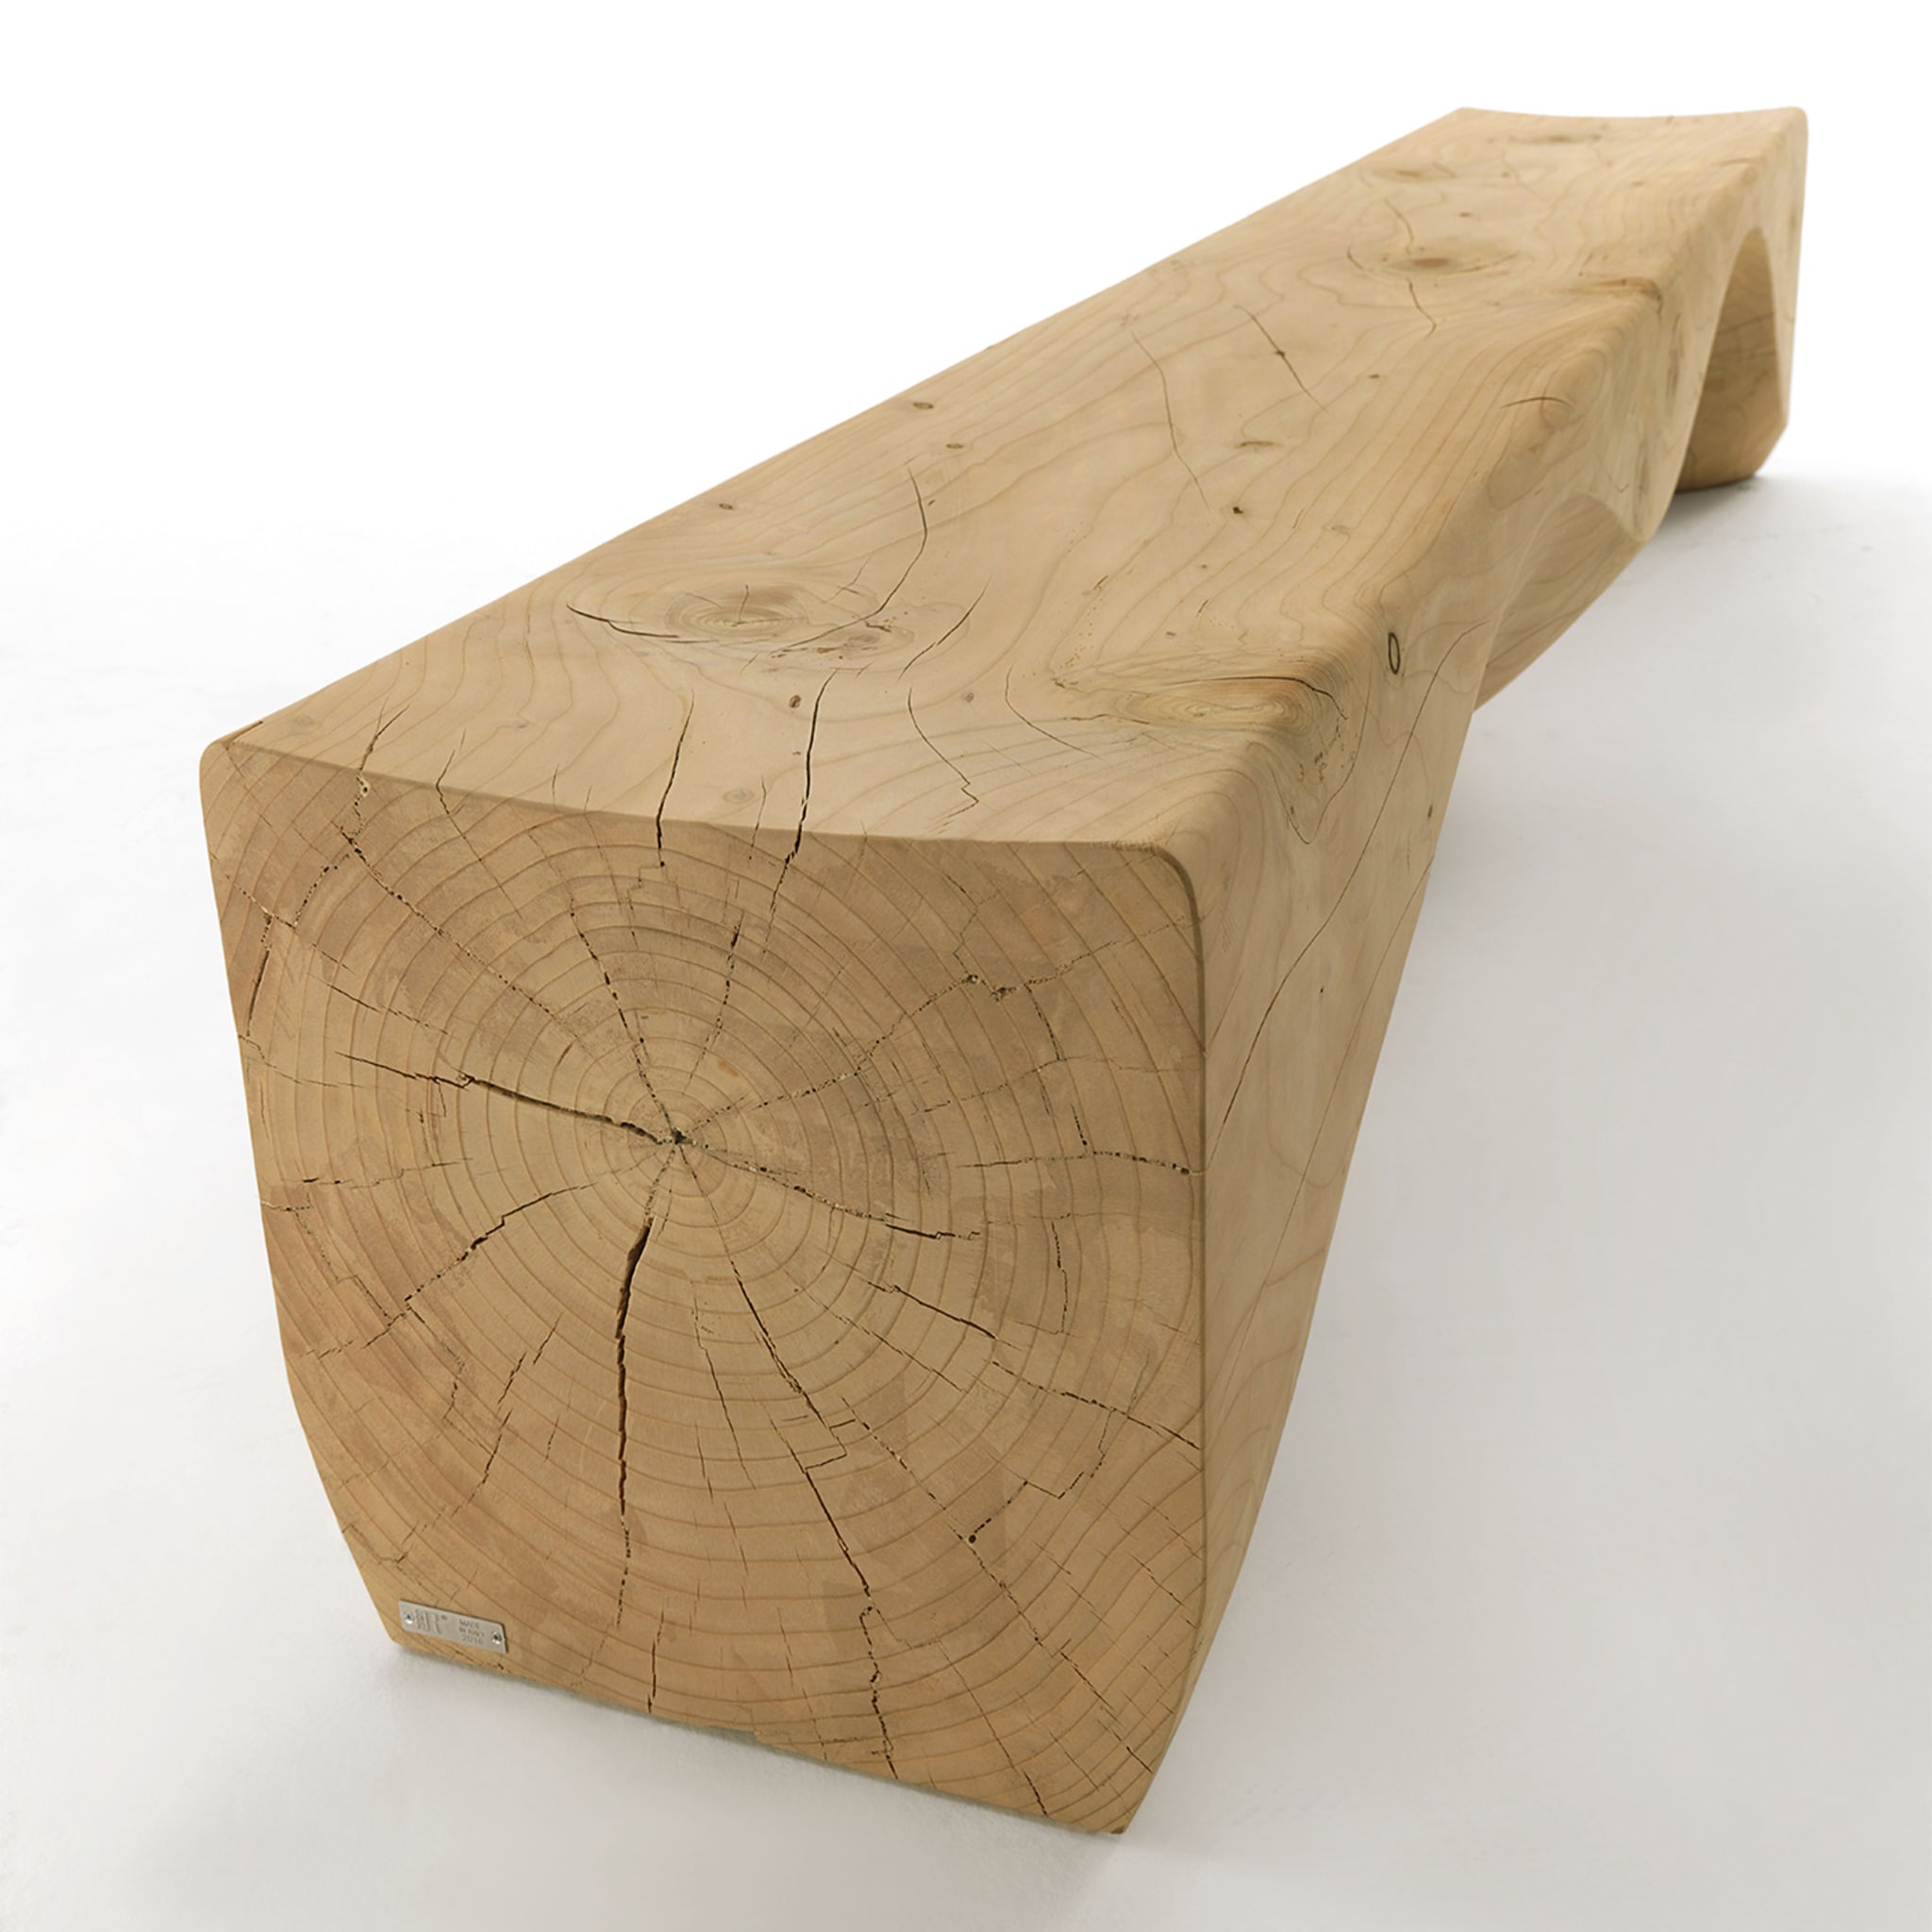 Mountains Bench by Hsiao-Ching Wang - Alternative view 2